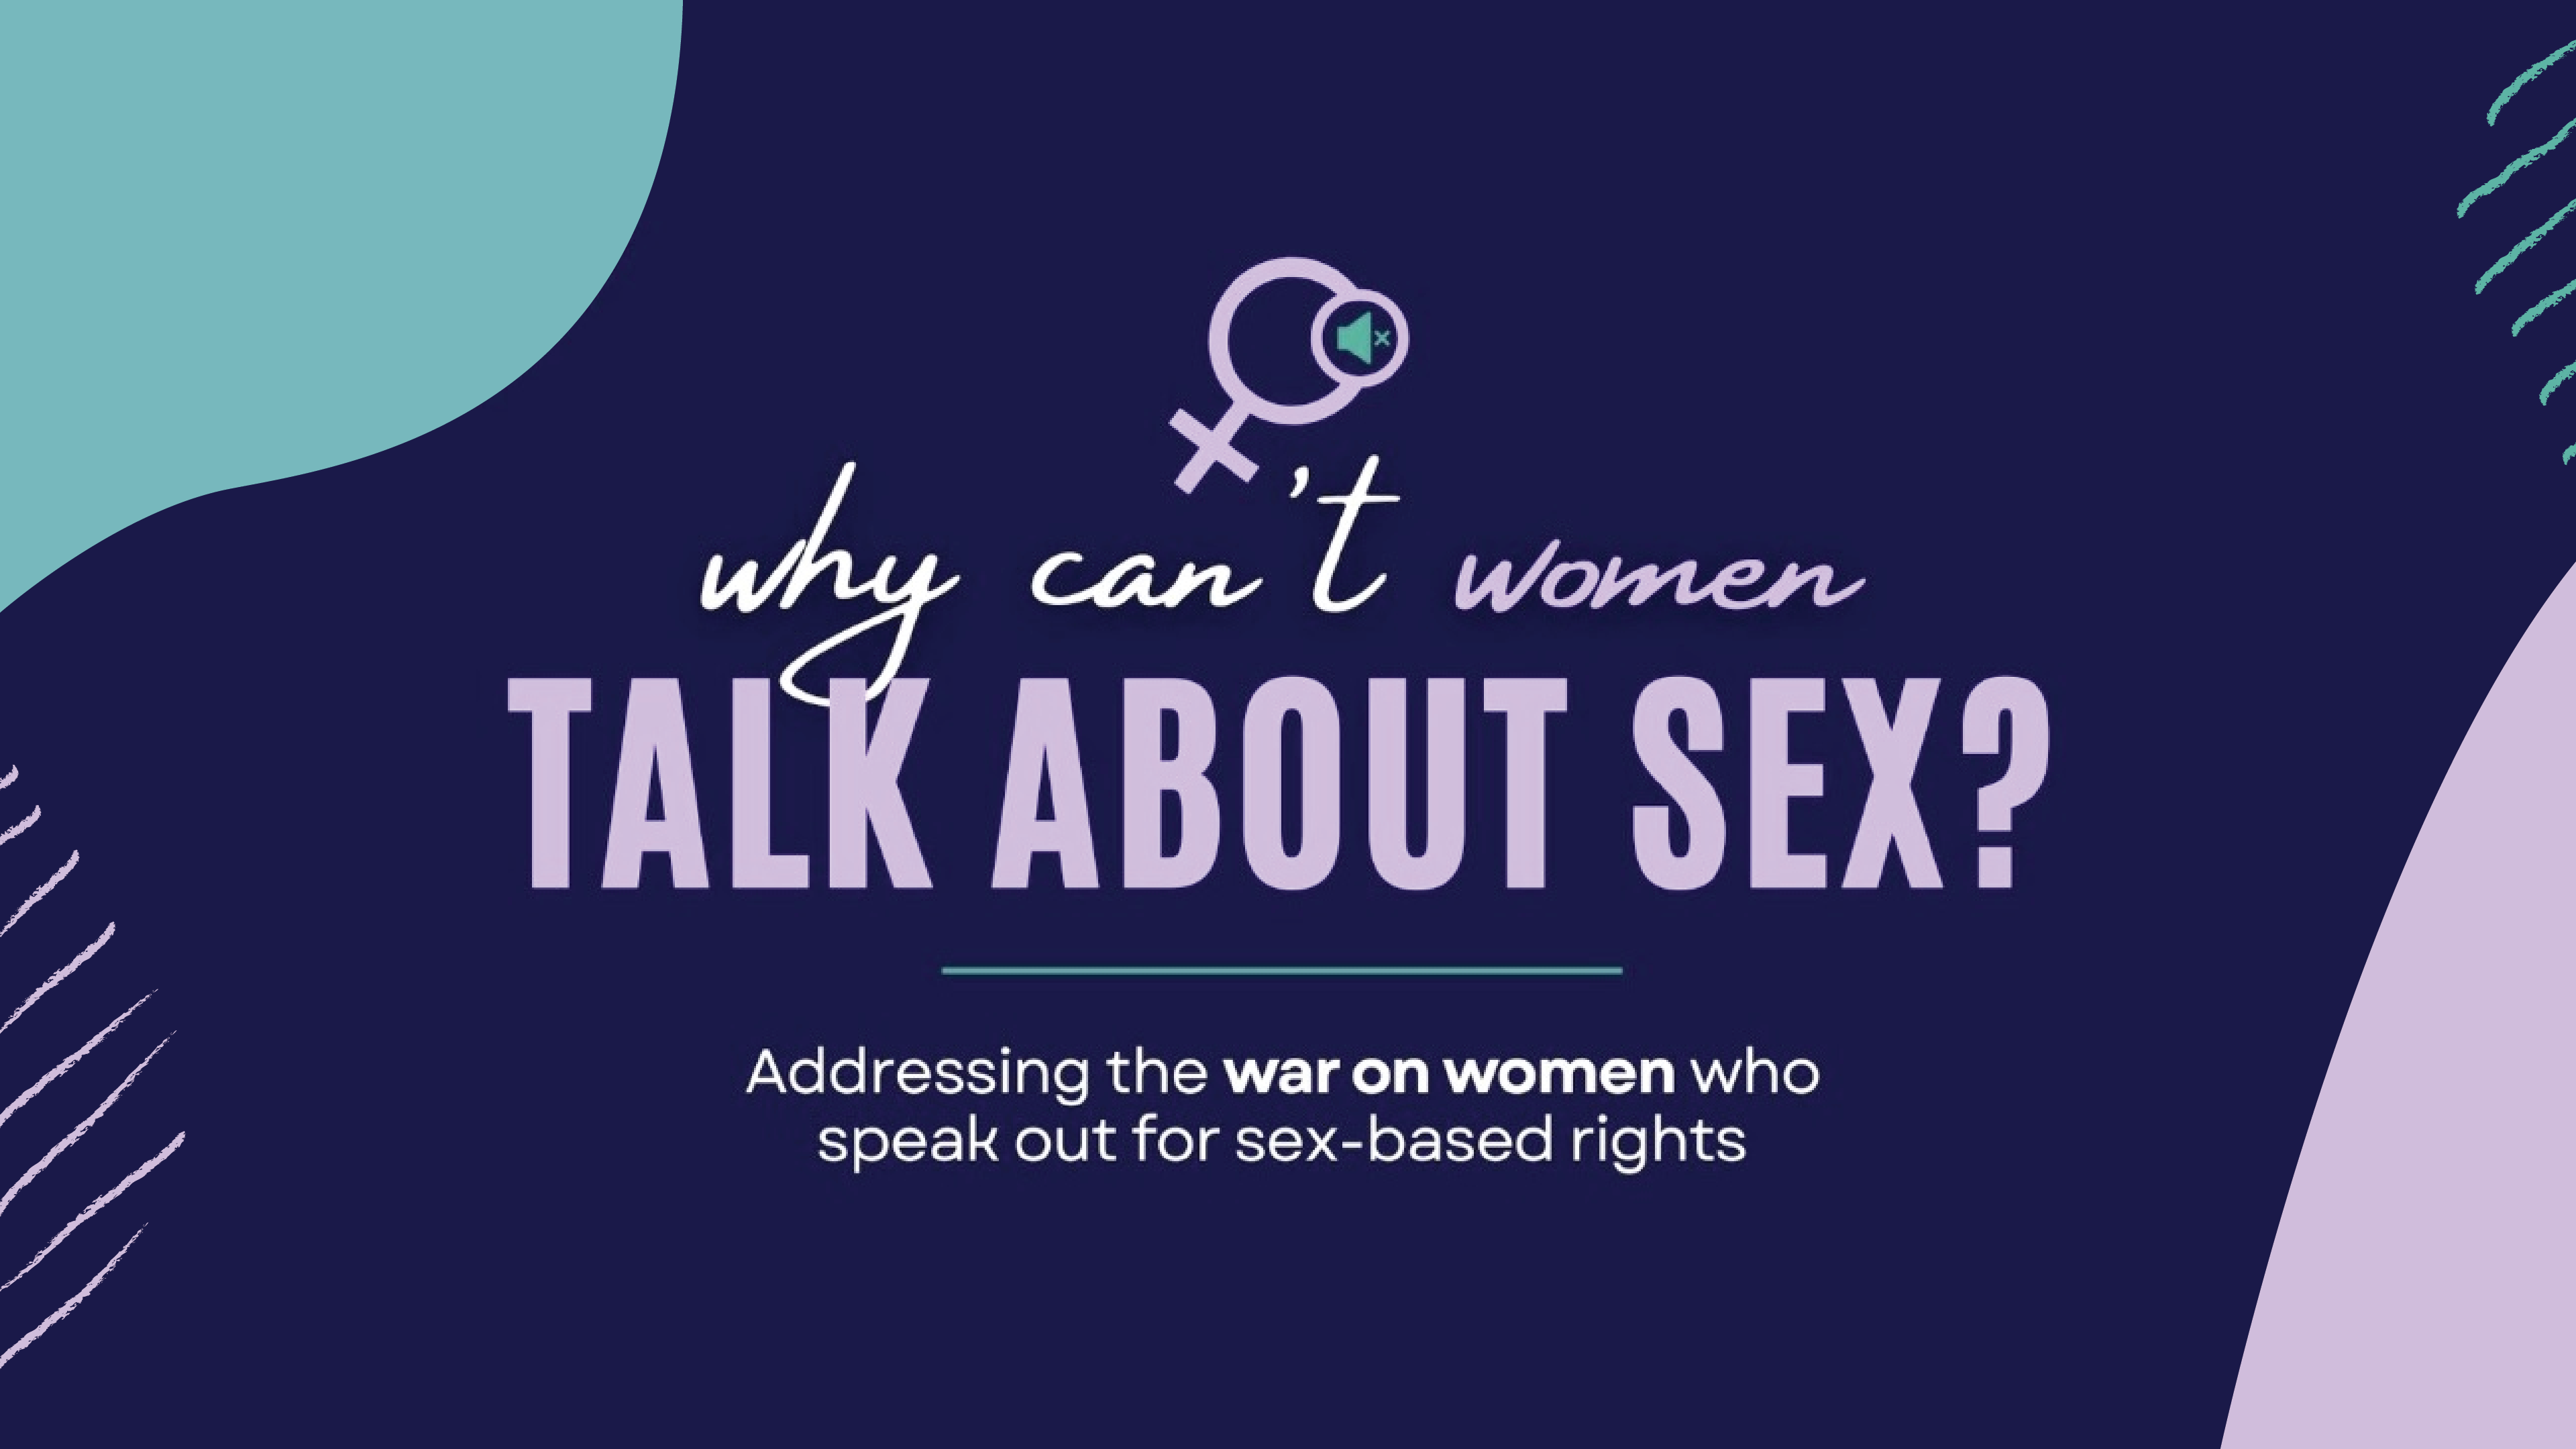 Why Can’t women talk about sex? | NSW Parliament House